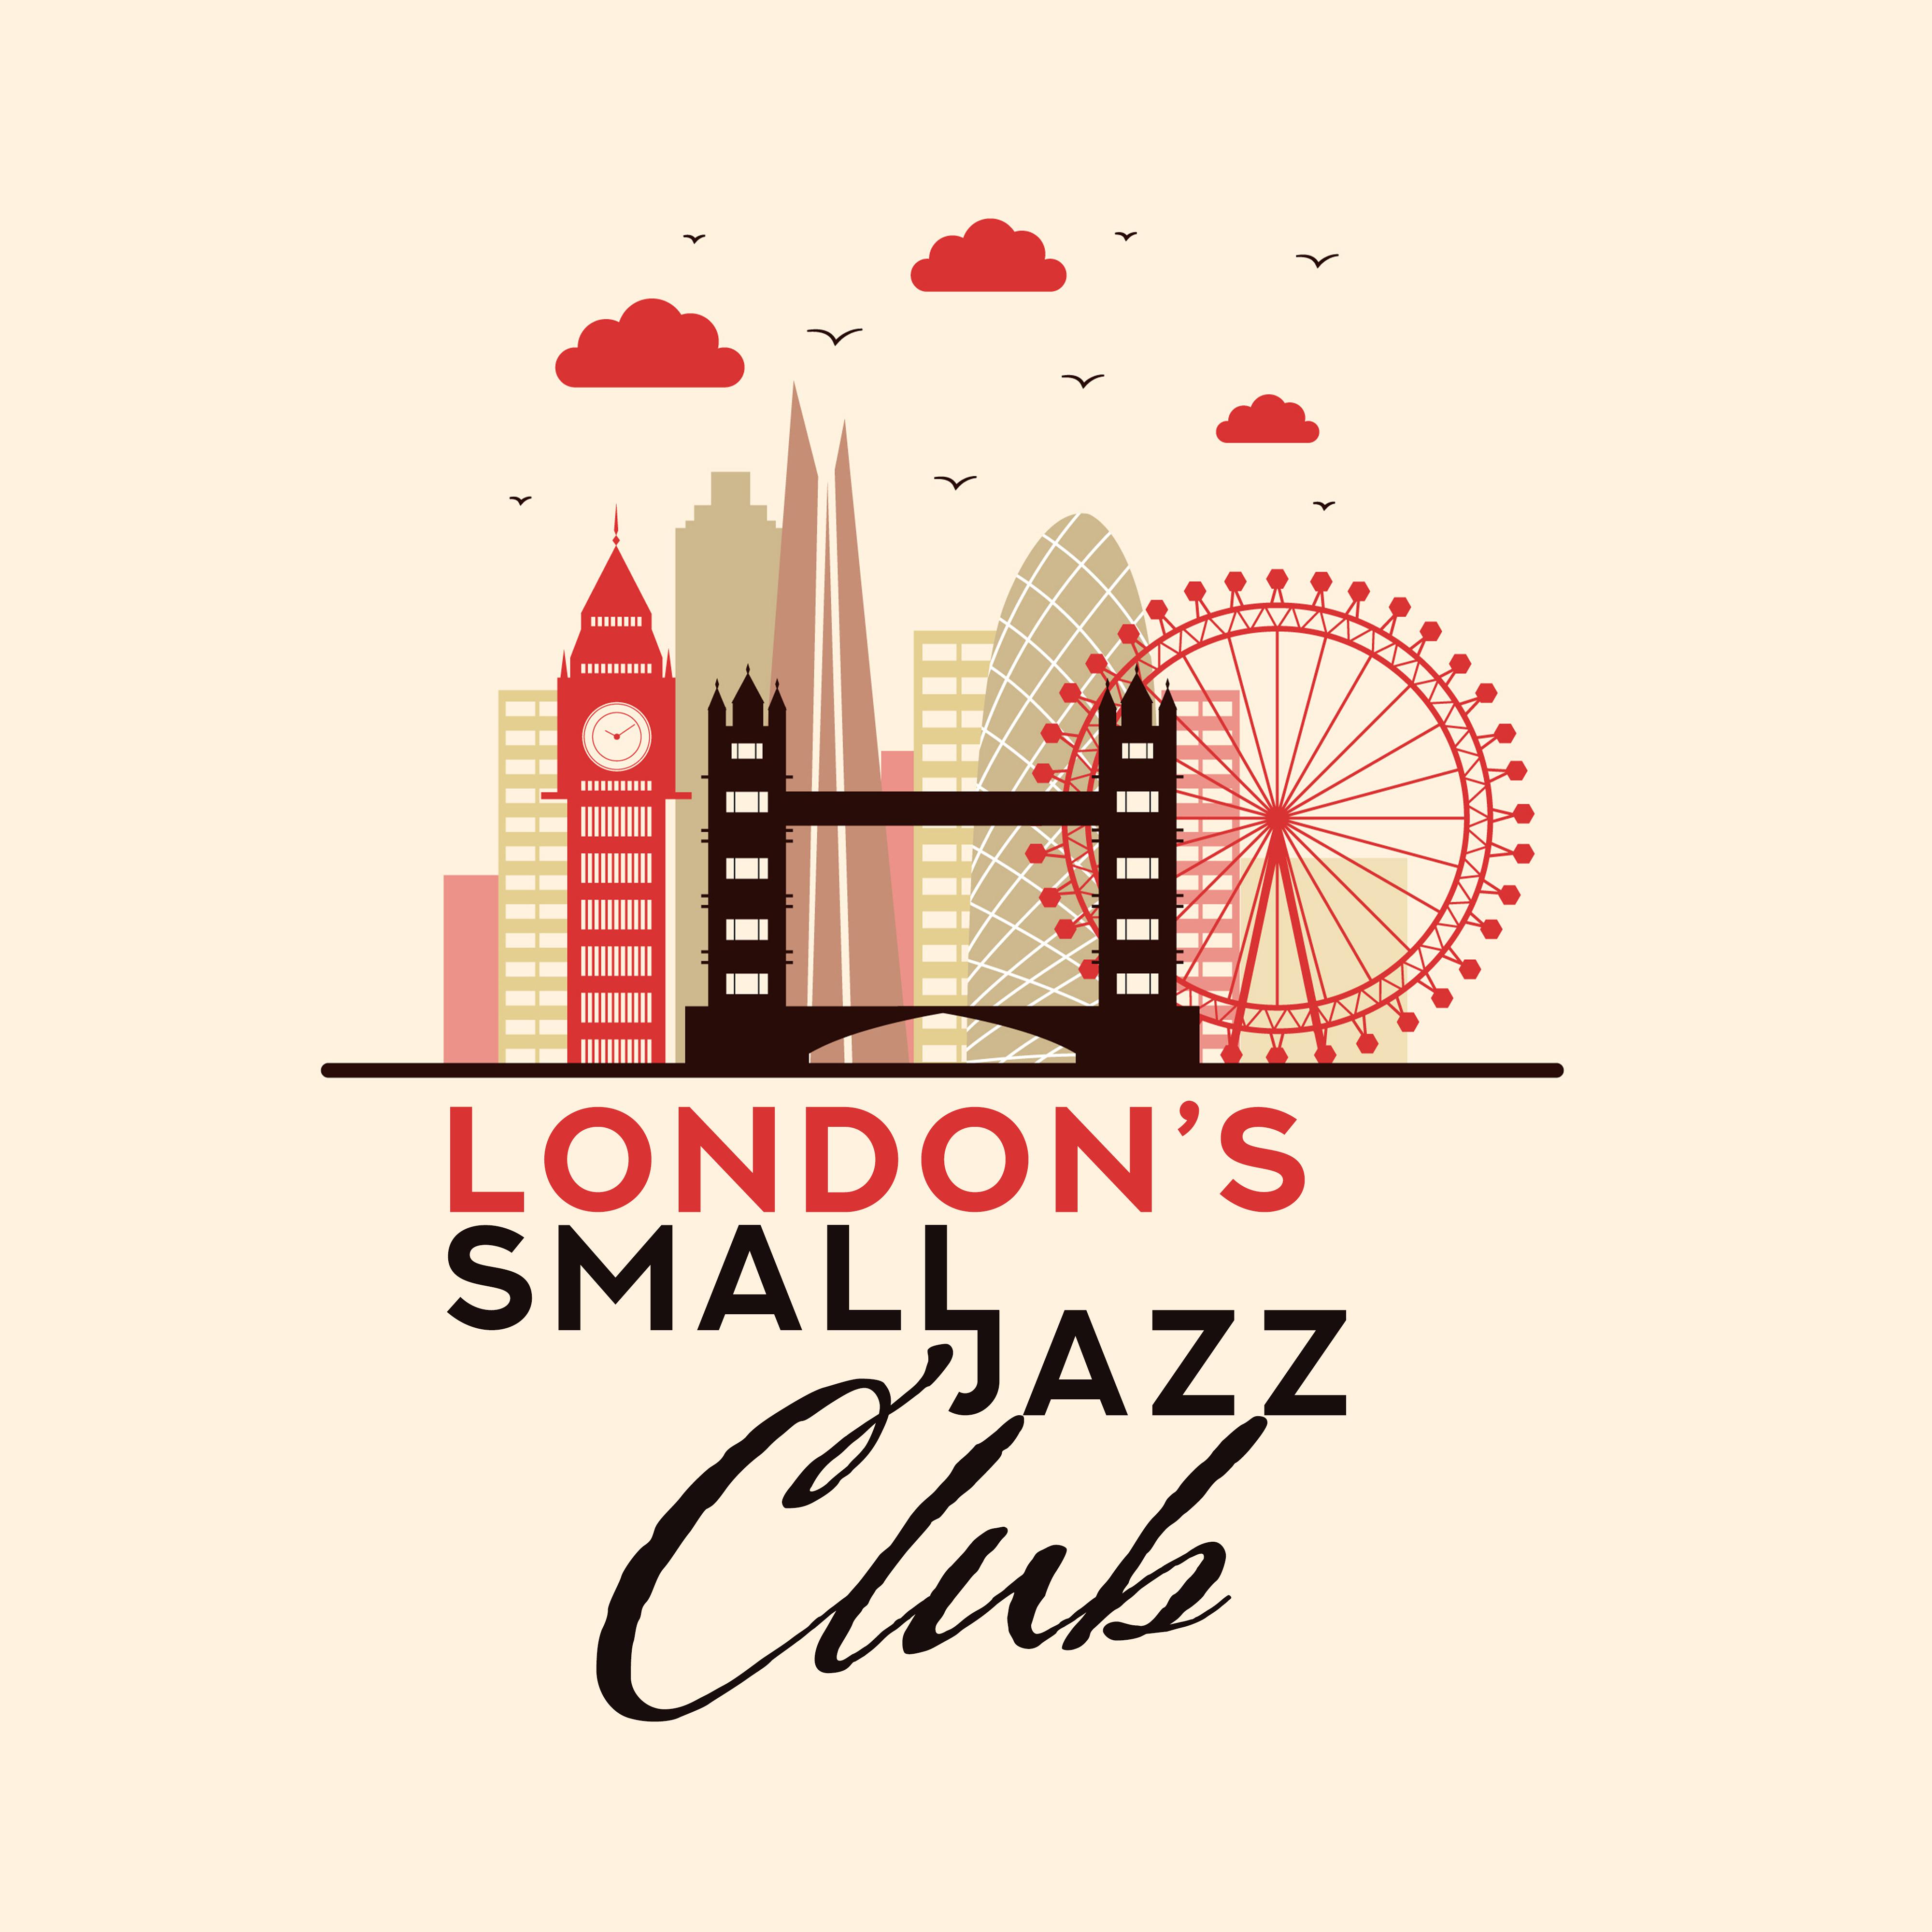 London’s Small Jazz Club: 2019 Fresh Instrumental Smooth Jazz Music for Jazz Clubs, Restaurants or Cafes, Positive Vibes for Good Time Spending, Soft Melodies Played on Piano, Guitar & Contrabass